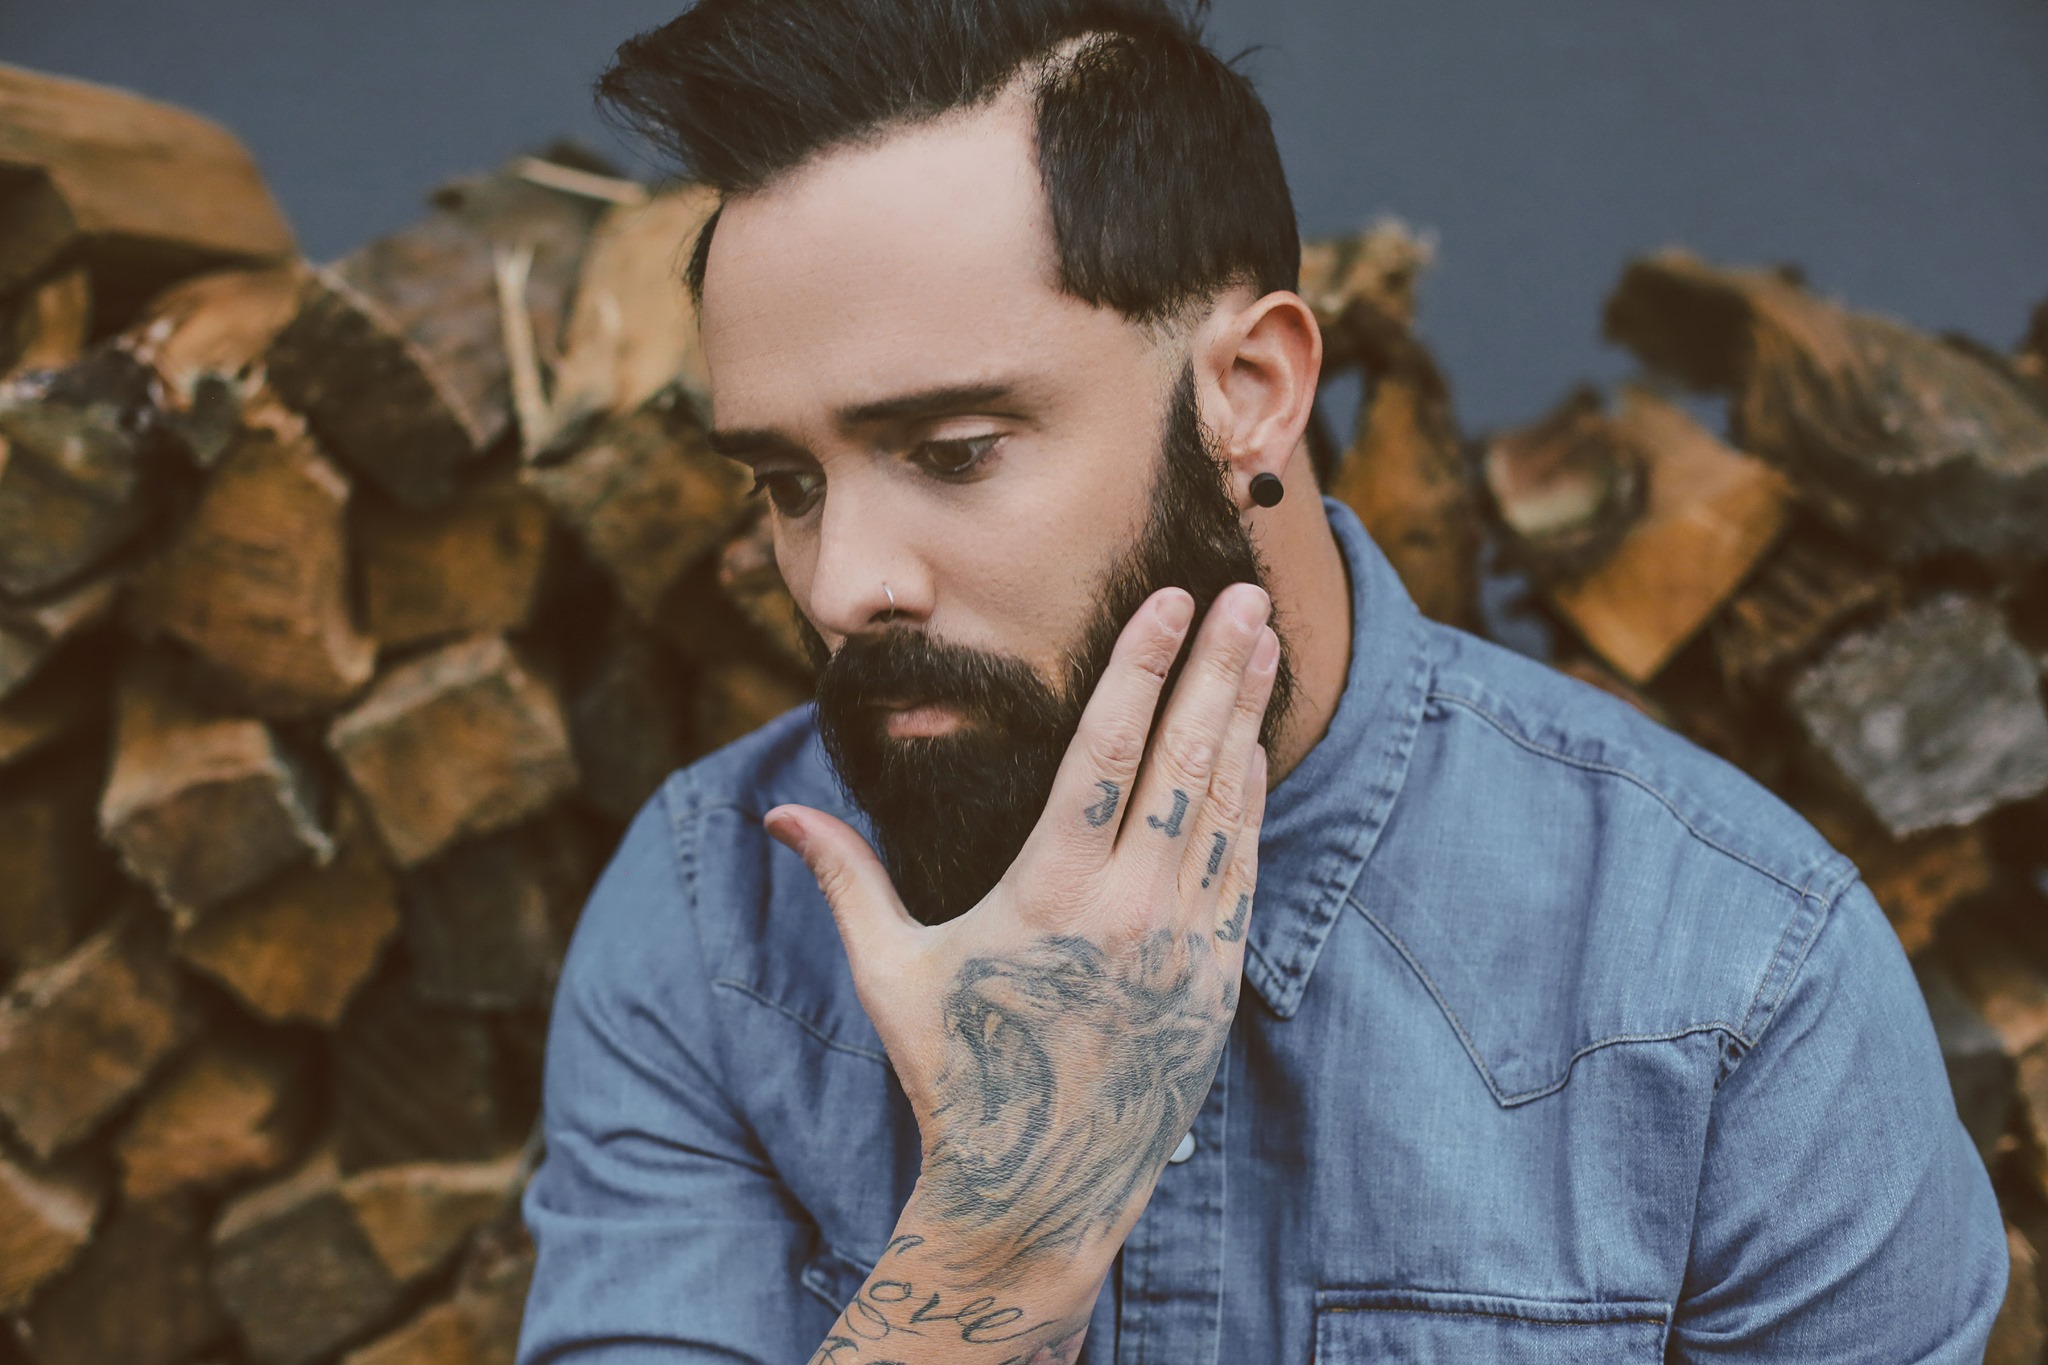 We Need to Value Truth over Feeling by John Cooper, lead singer of Skillet. He shares this as two high profile people in faith renounce their faith. 